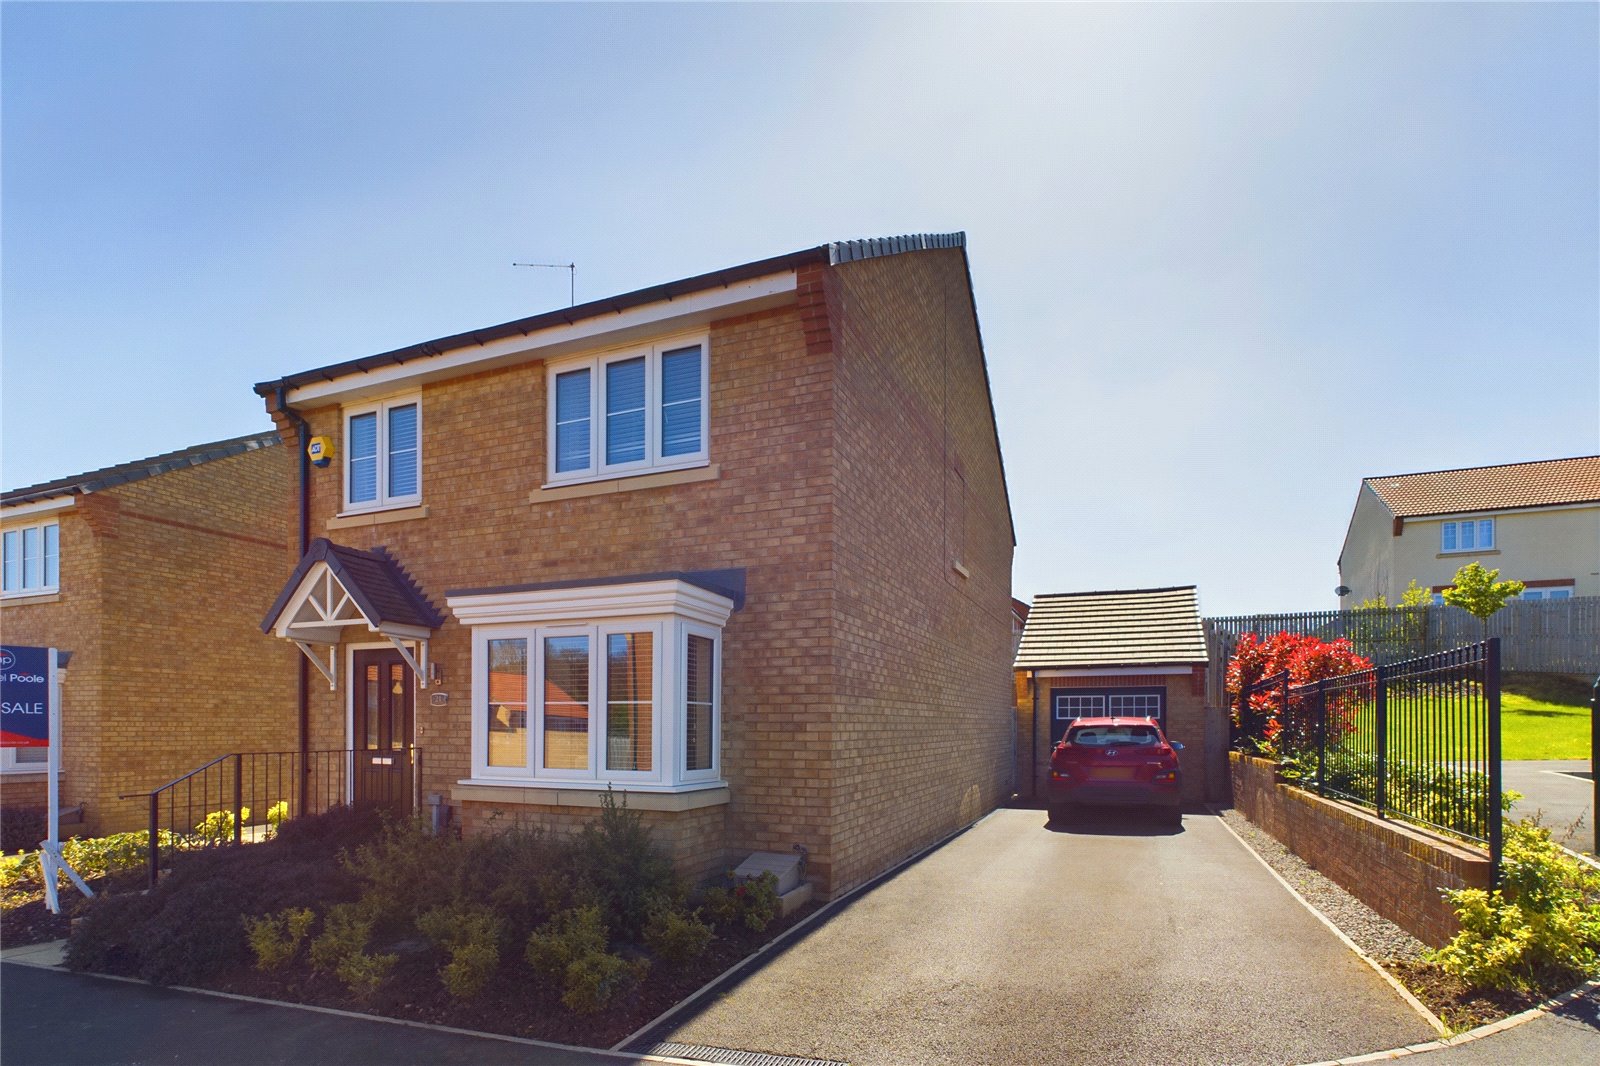 4 bed house for sale in Crossbill Close, Guisborough 1